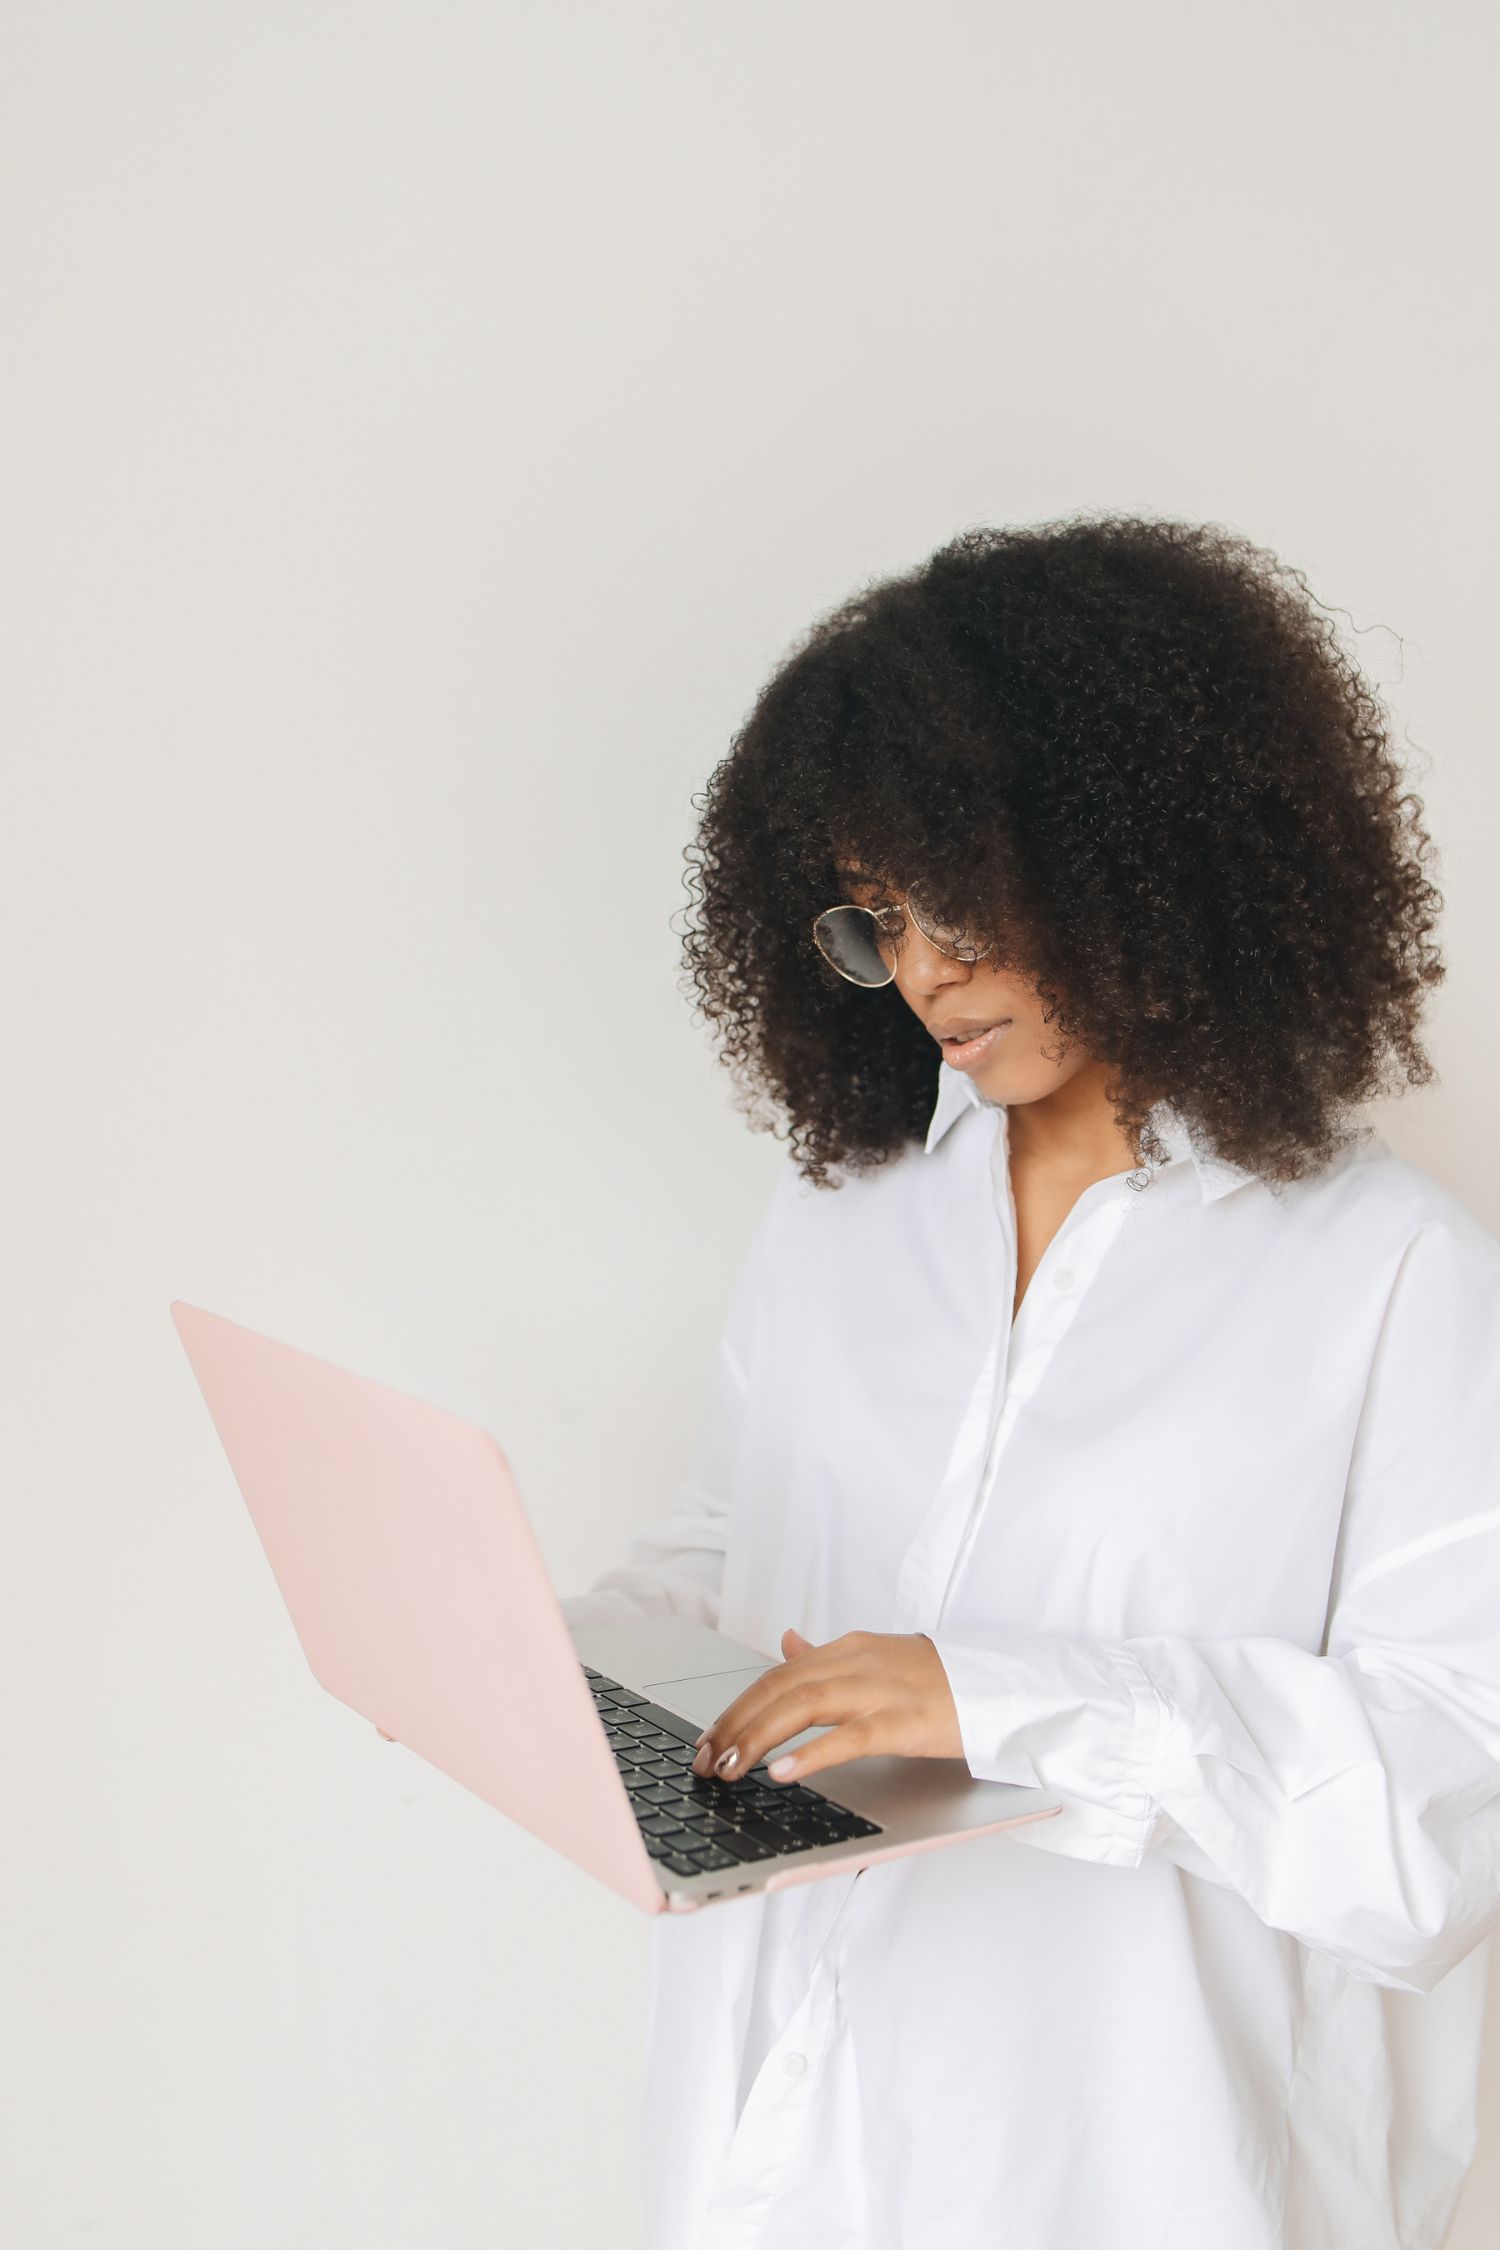 A female business owner wearing a white shirt working on her laptop